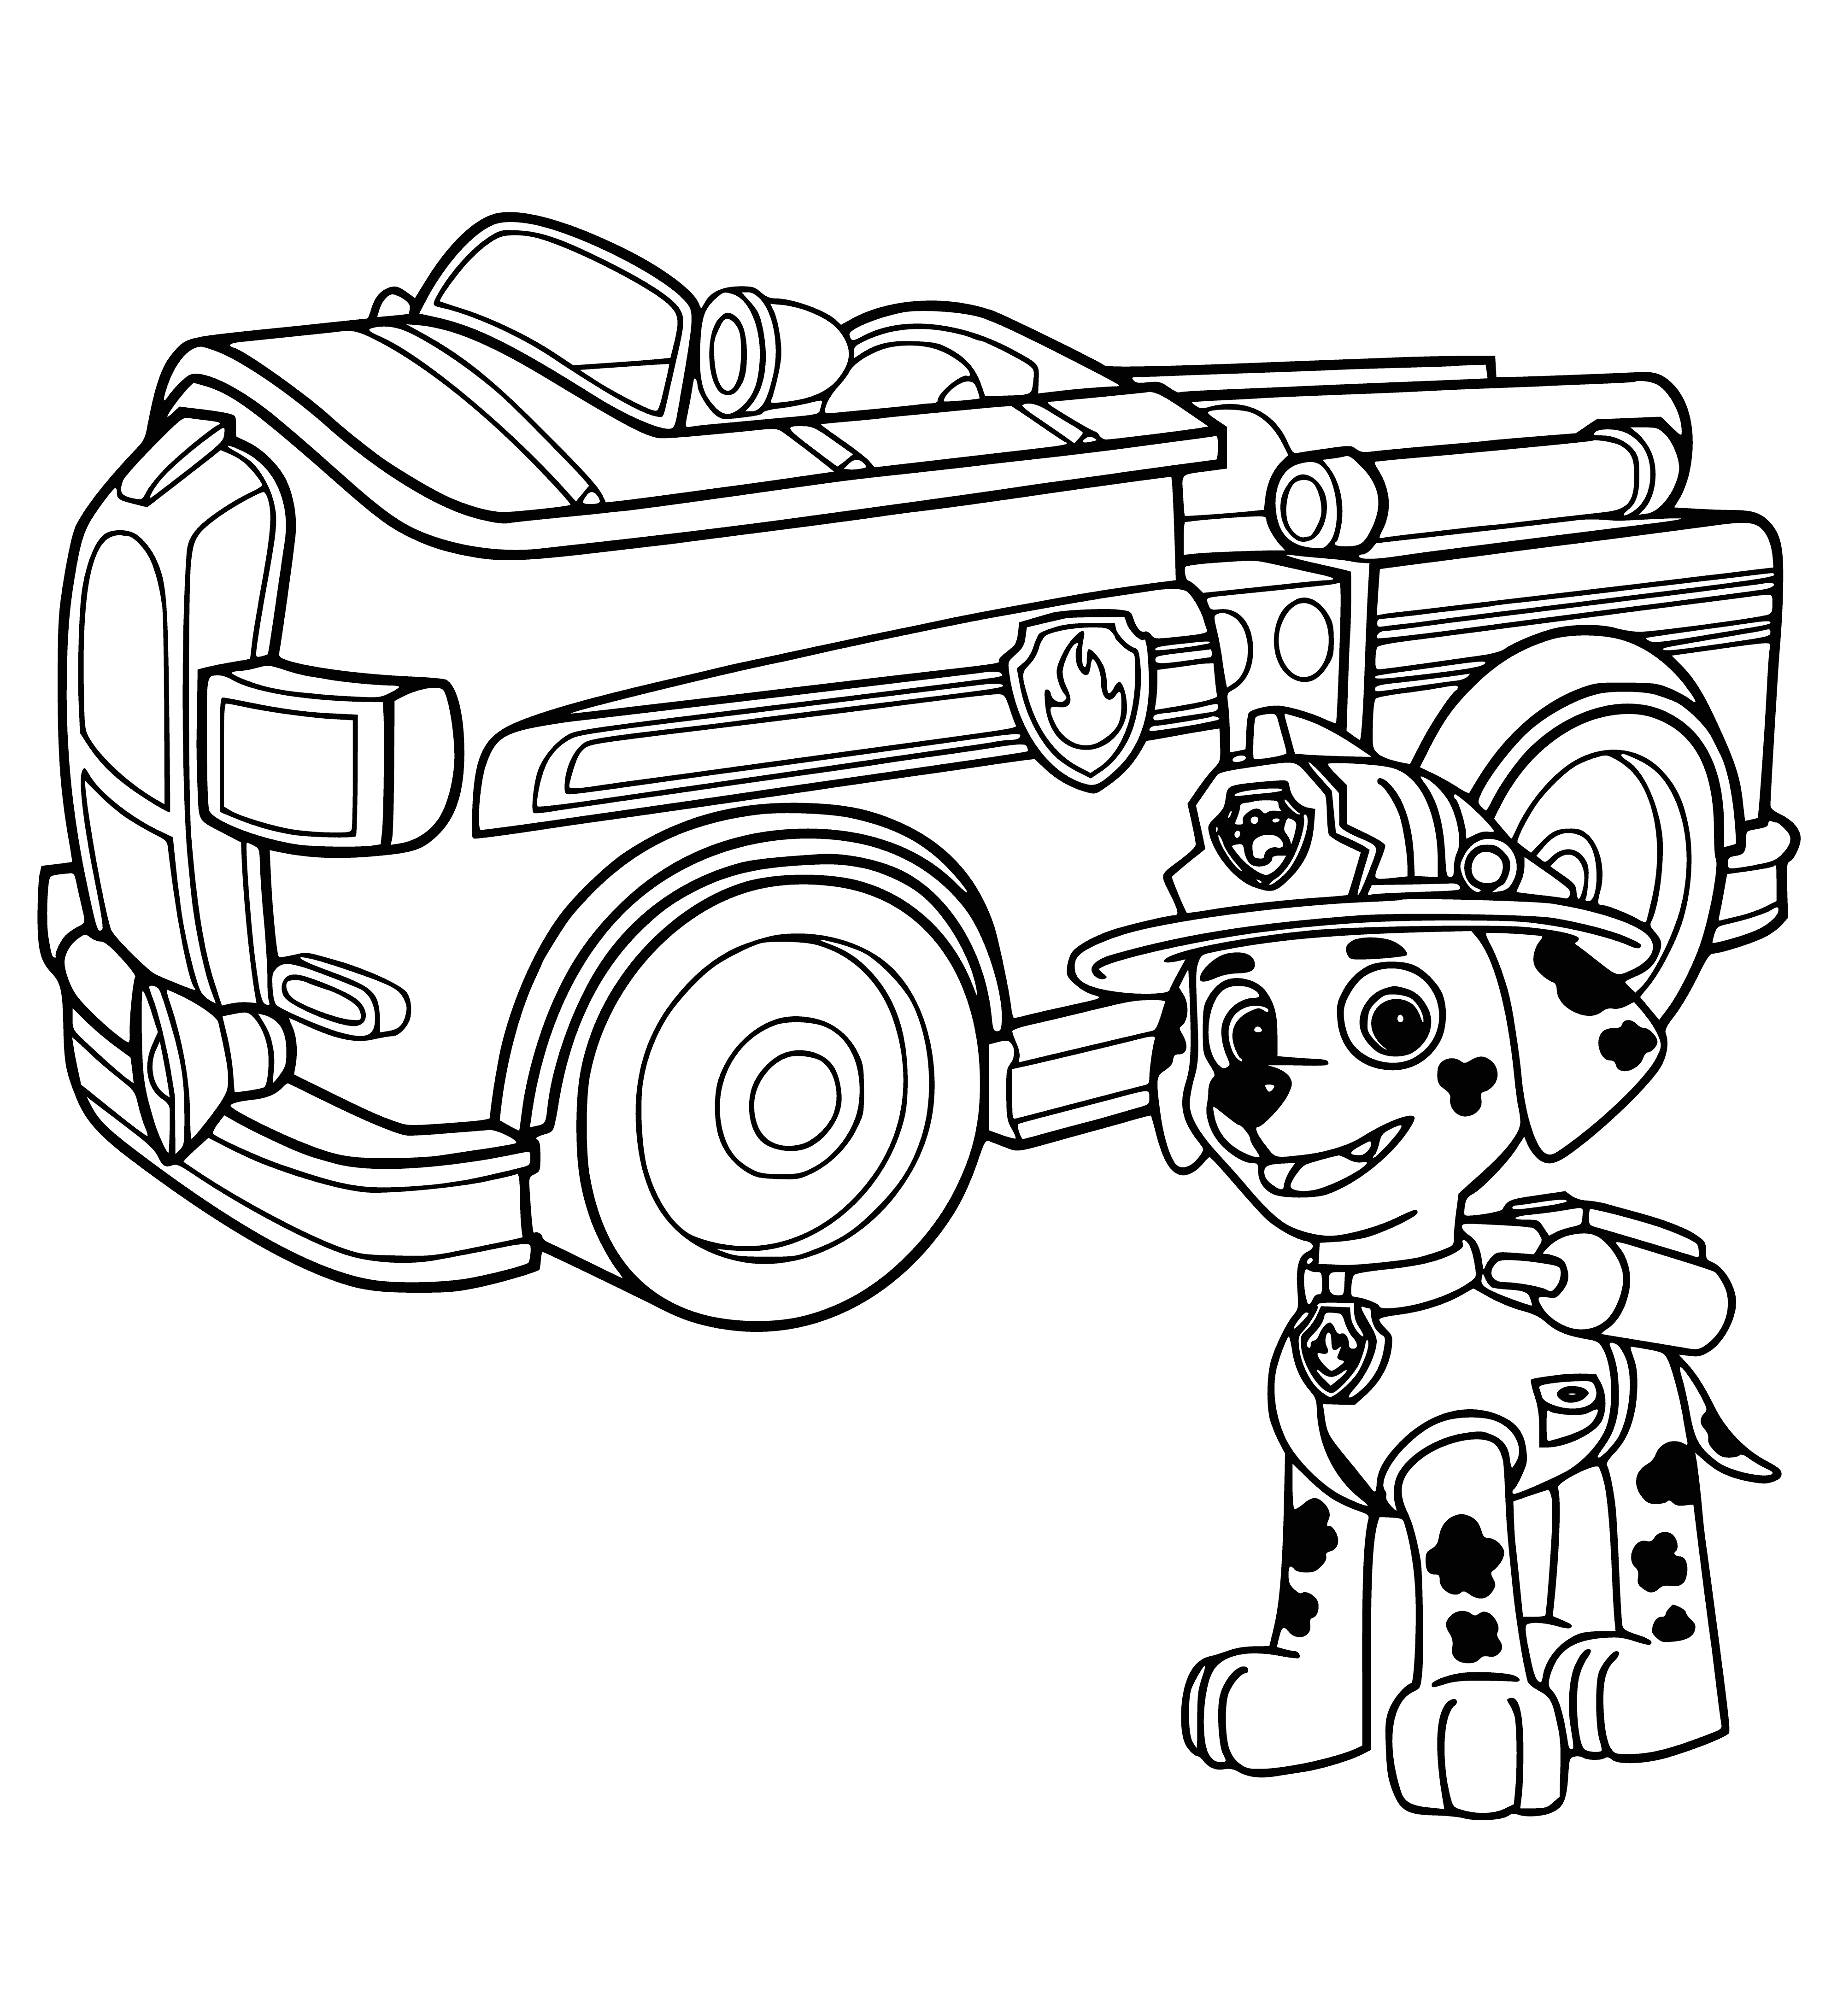 coloring page: Marshal is PAW Patrol's fire pup, voiced by Jaxon Mercer; allergic to cats & drives fire truck!